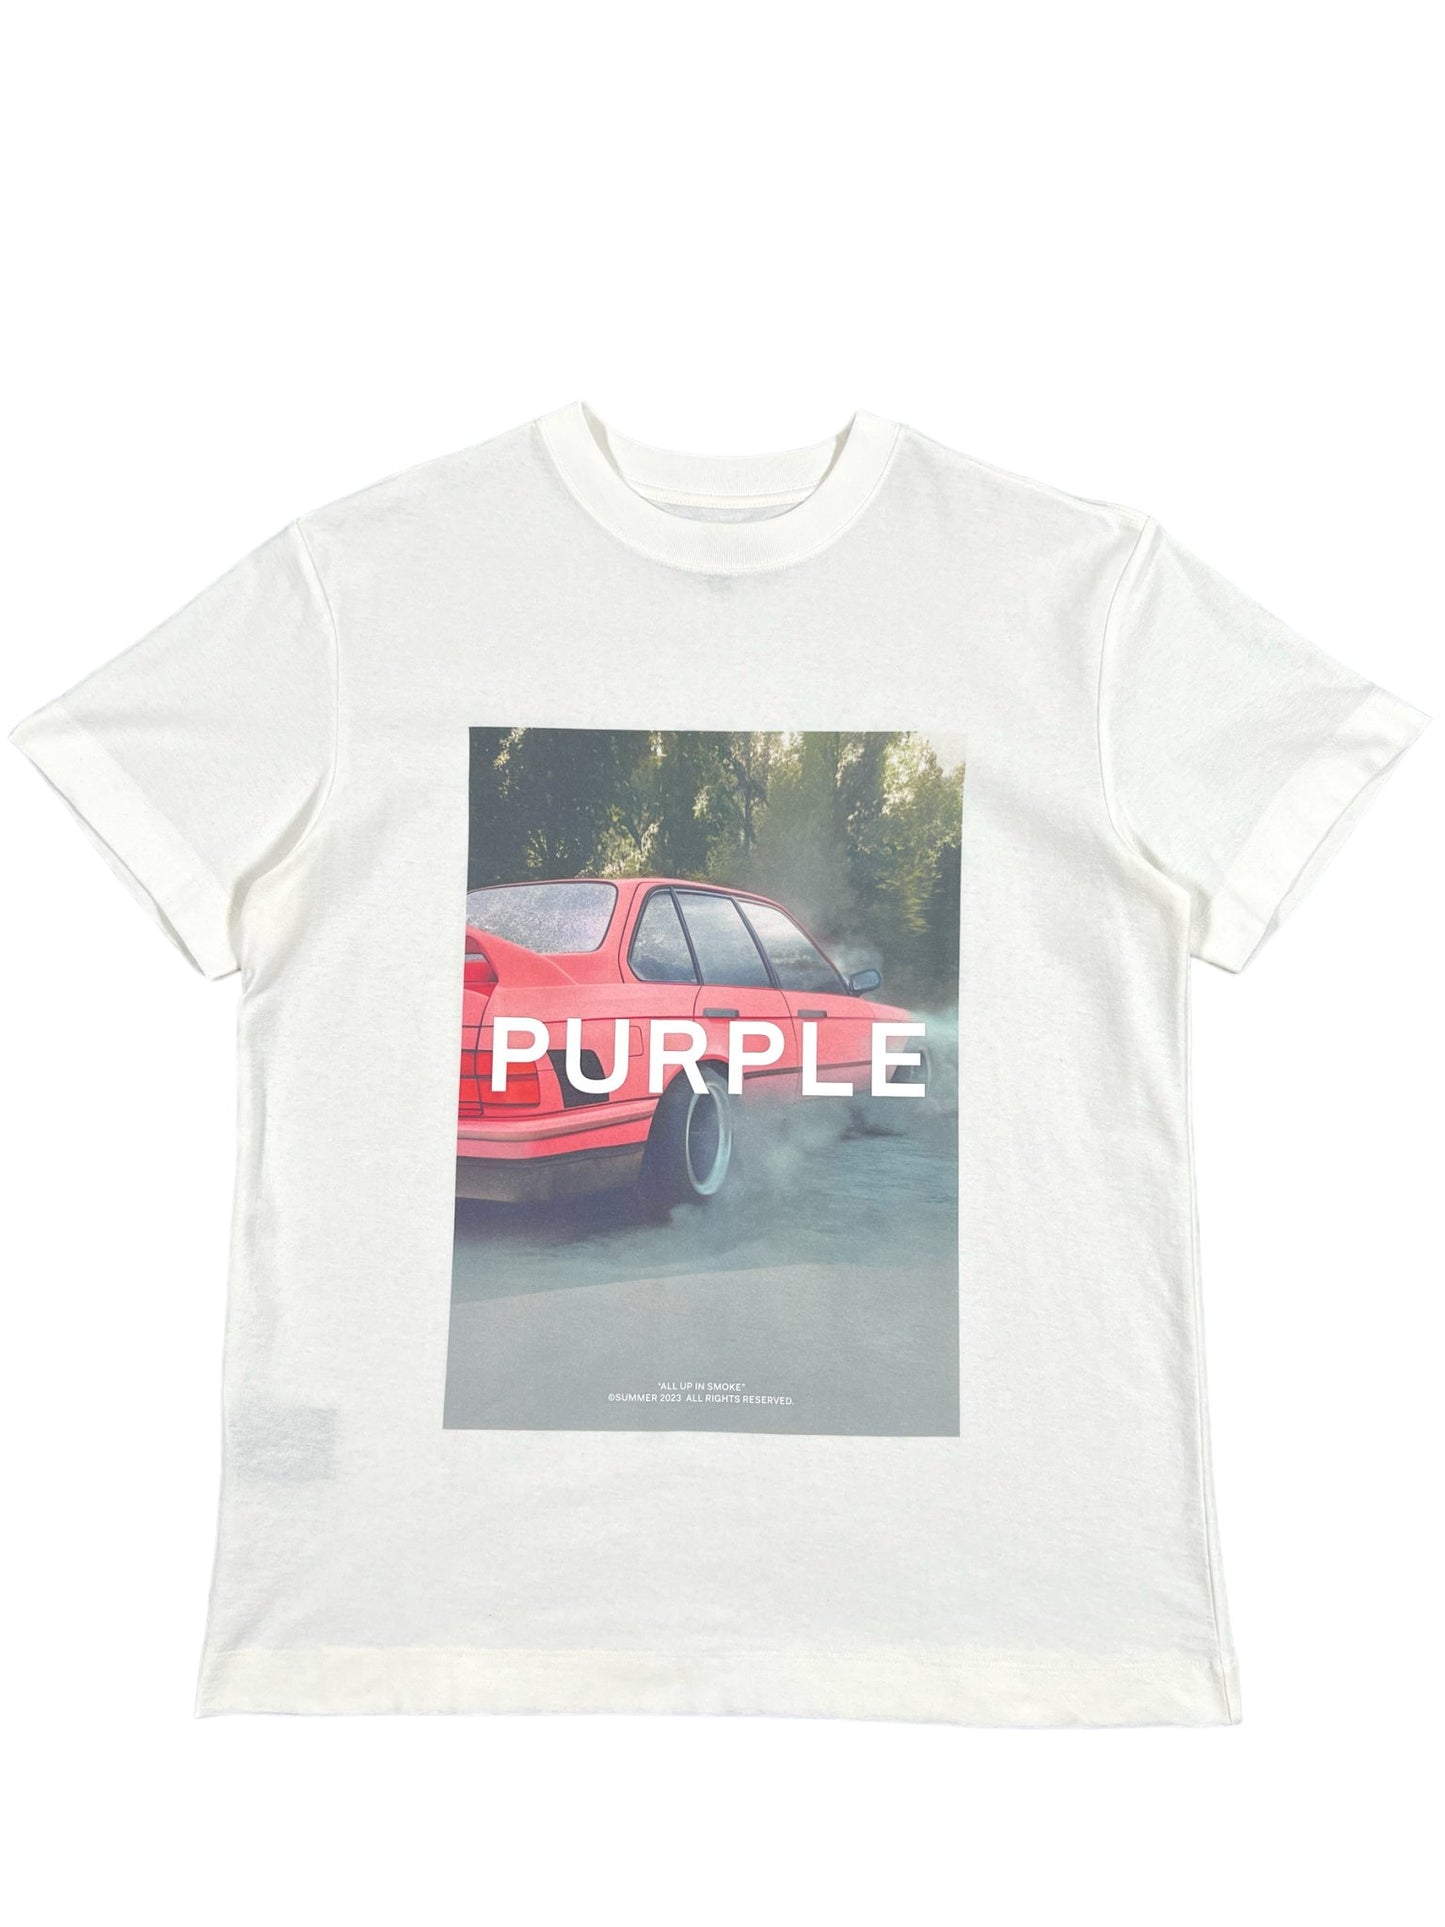 A PURPLE BRAND P104-QRCC823 TEXTURED JERSEY SS TEE OFF WHITE with a graphic image of a car.